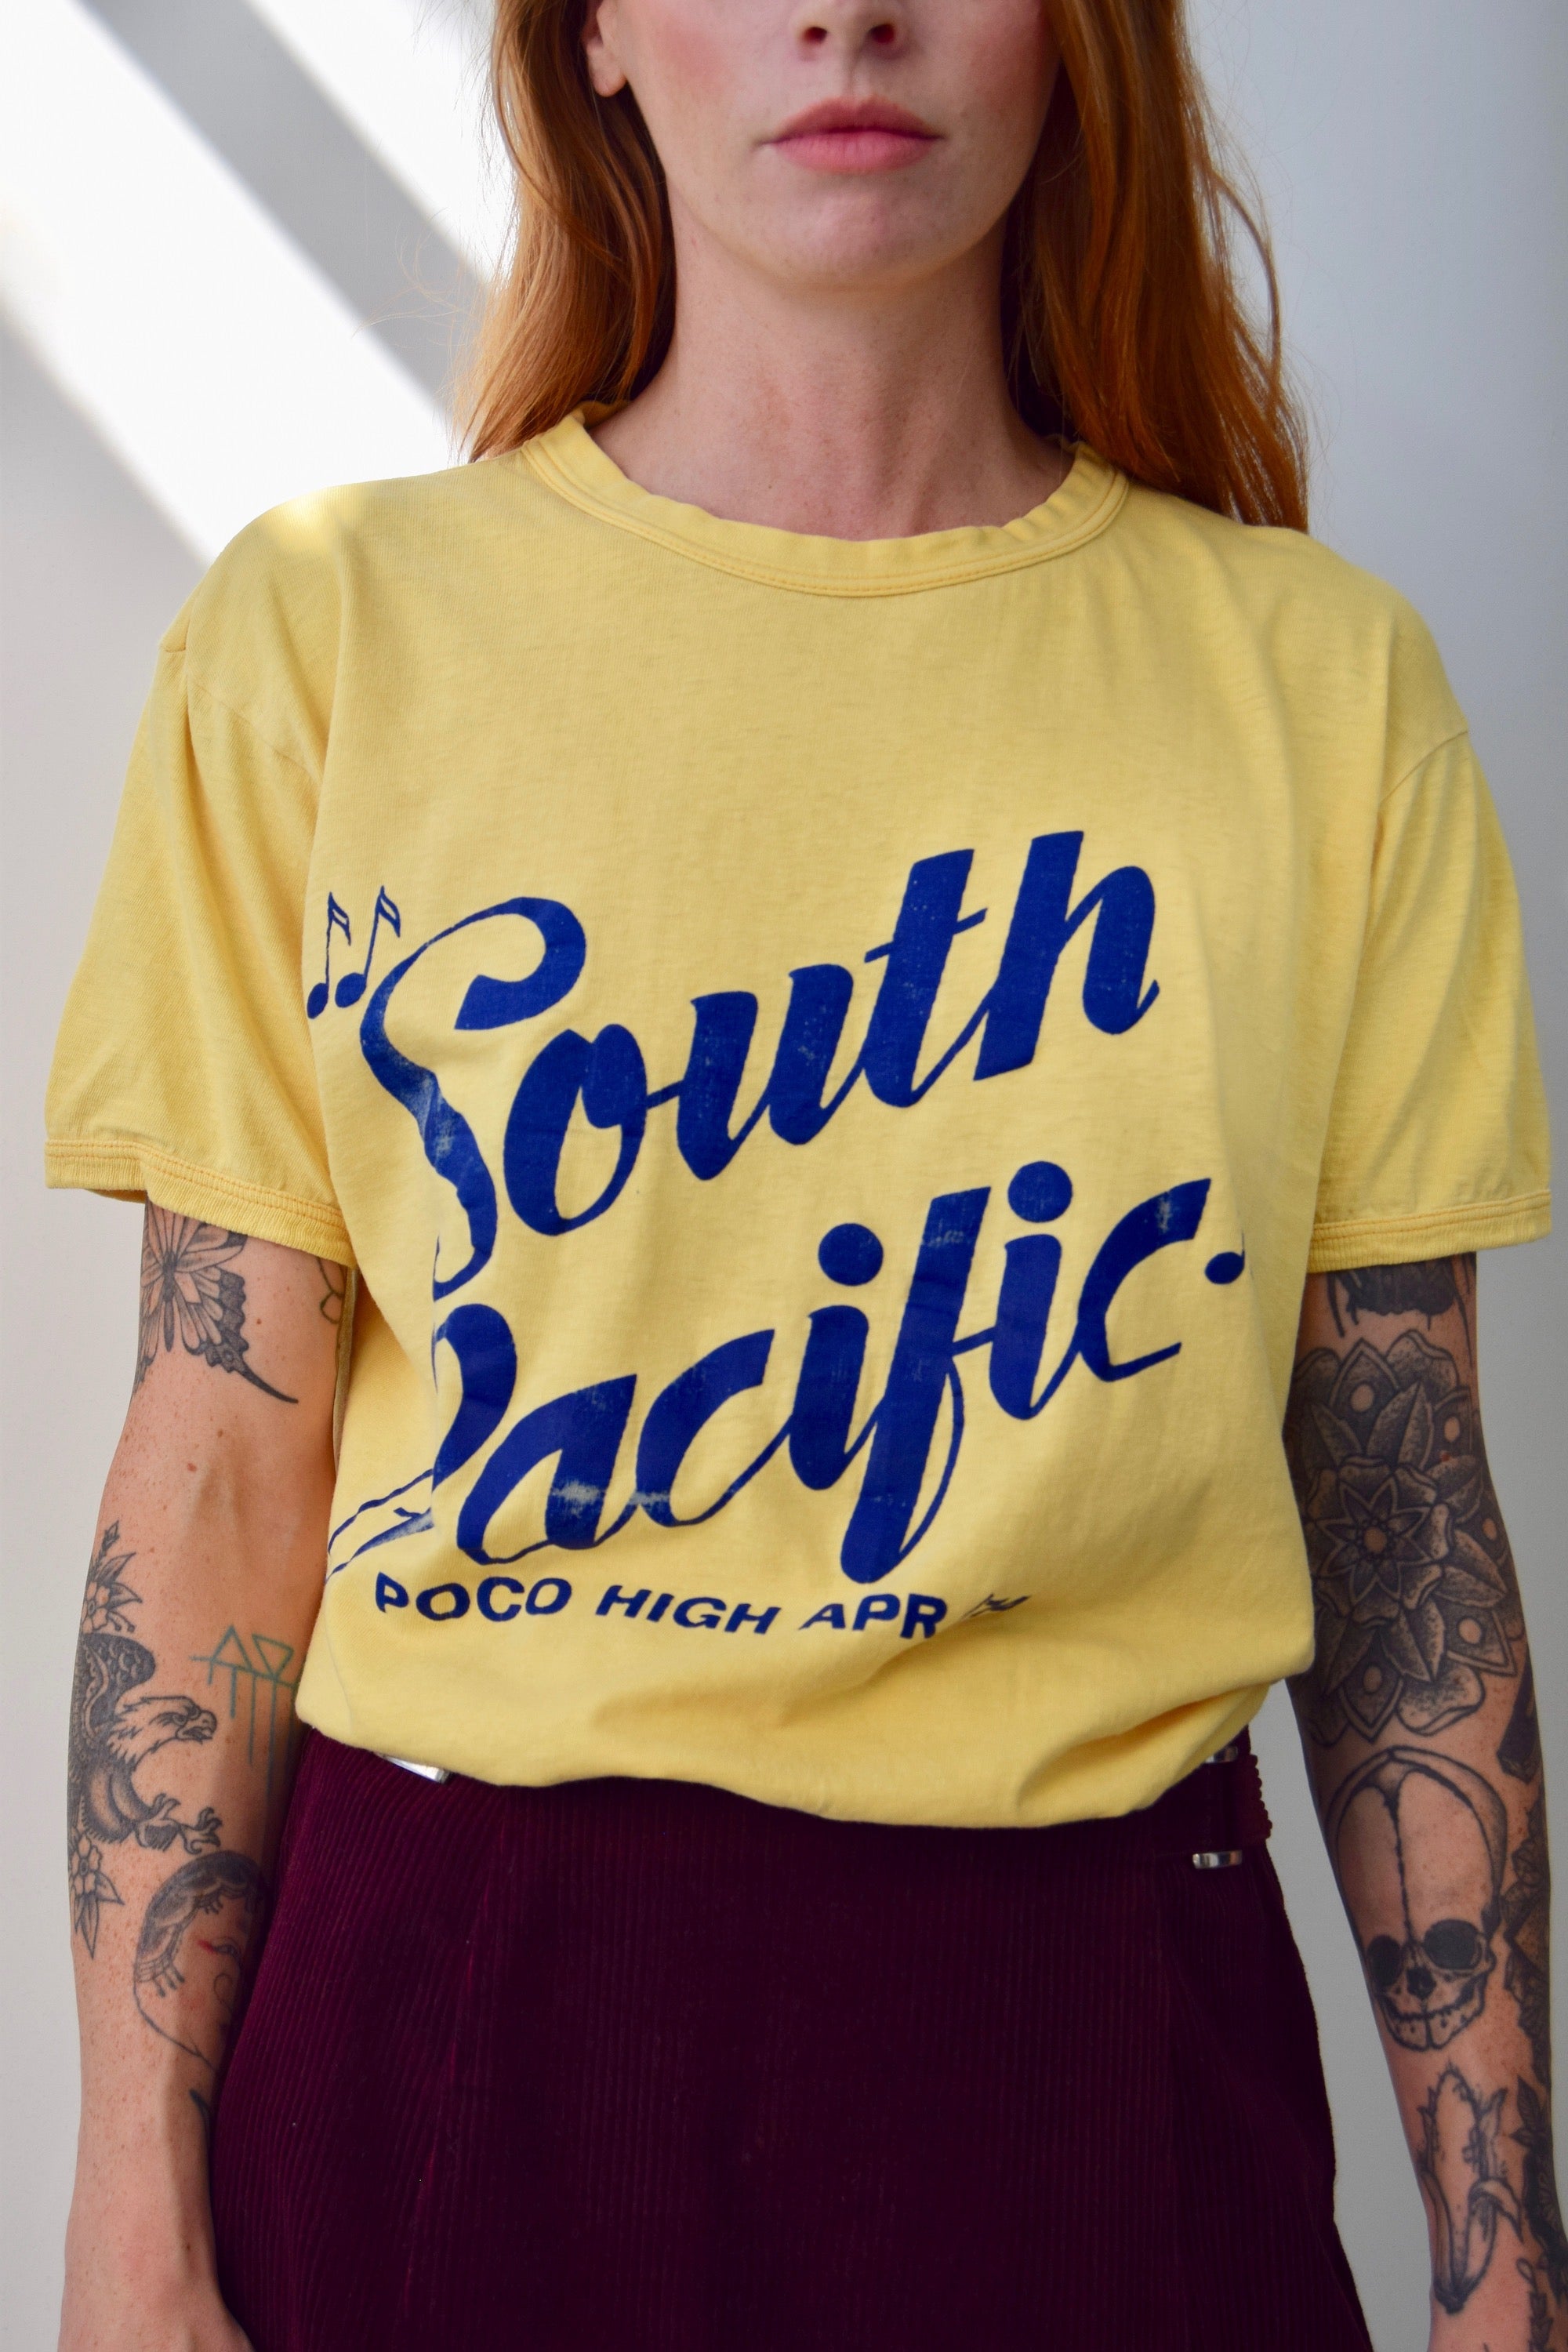 1974 High School Production of "South Pacific" Souvenir Tee